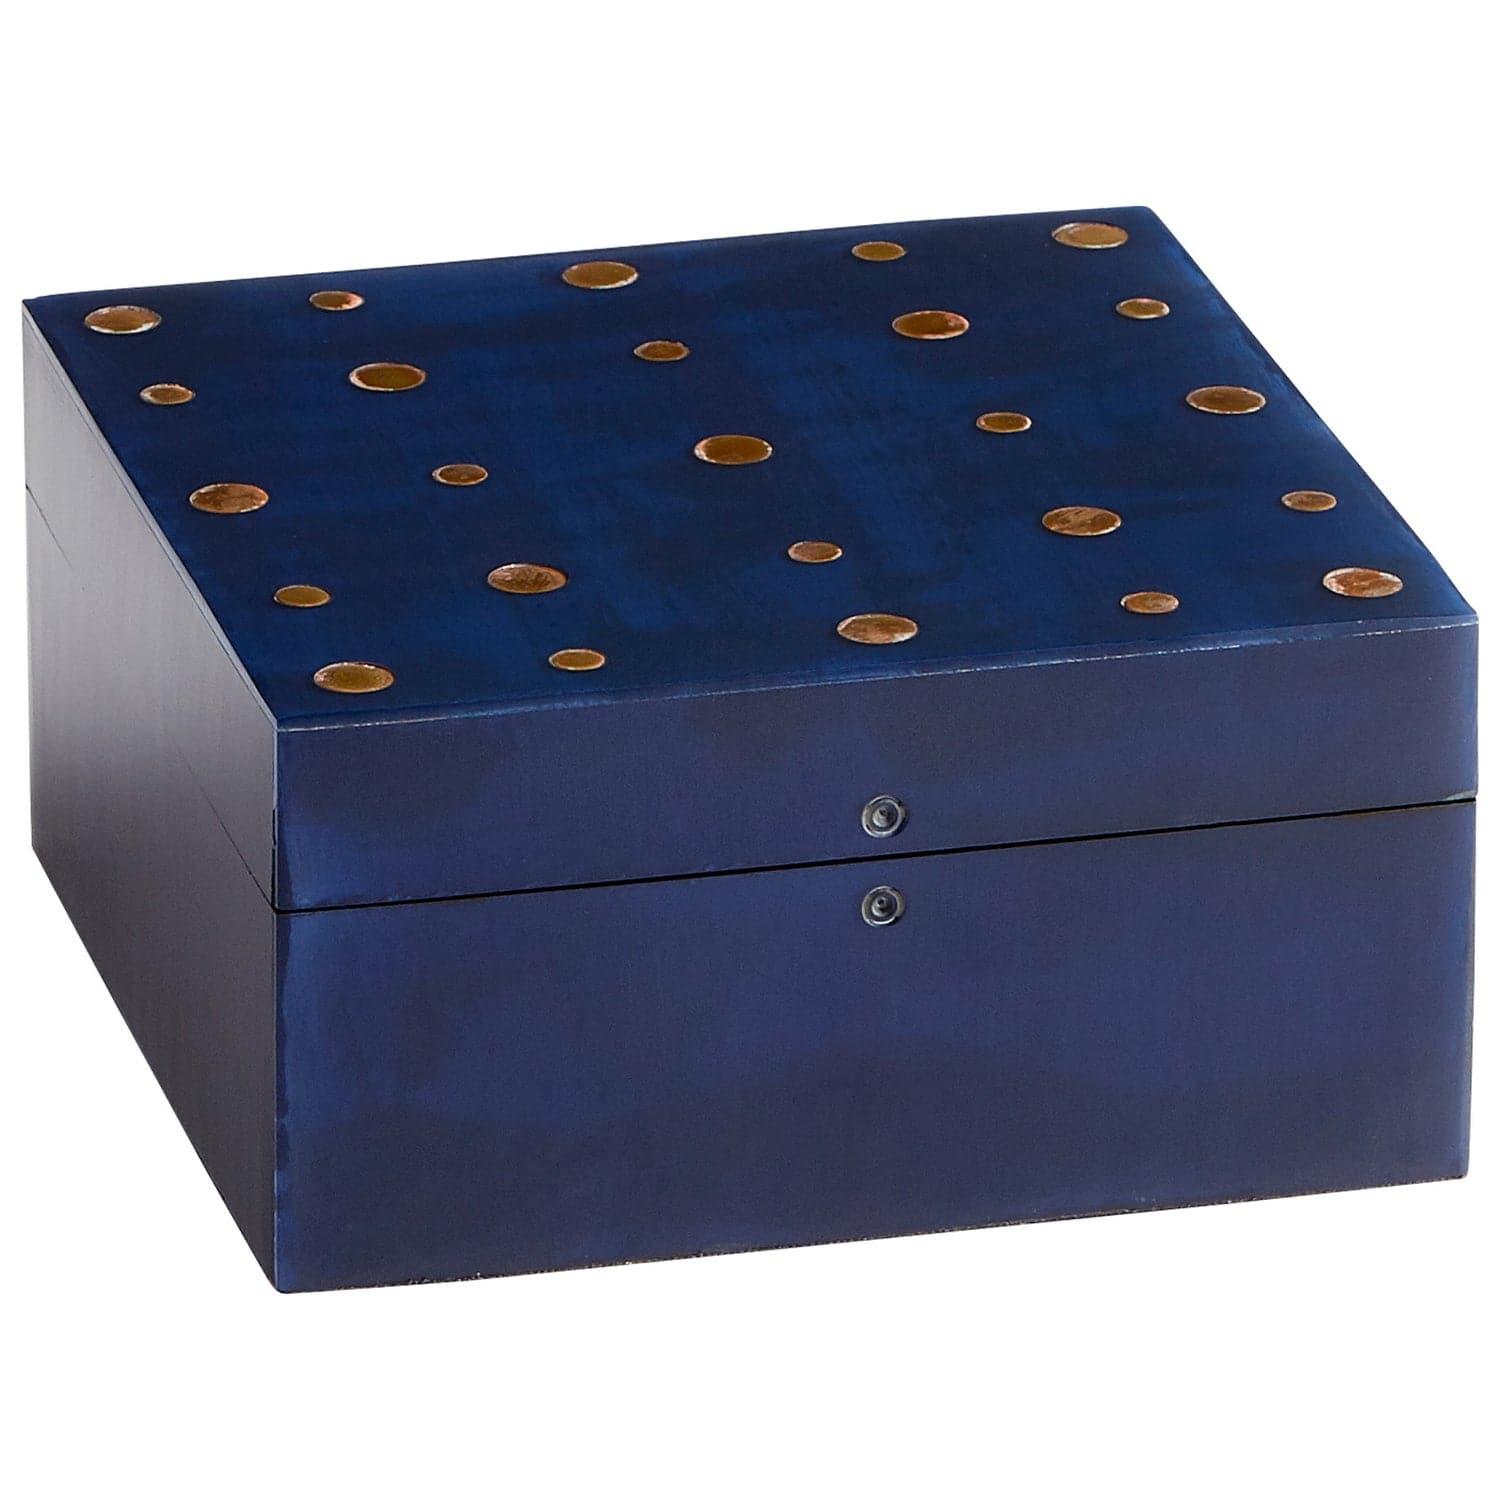 Cyan - 09789 - Container - Black And Brass